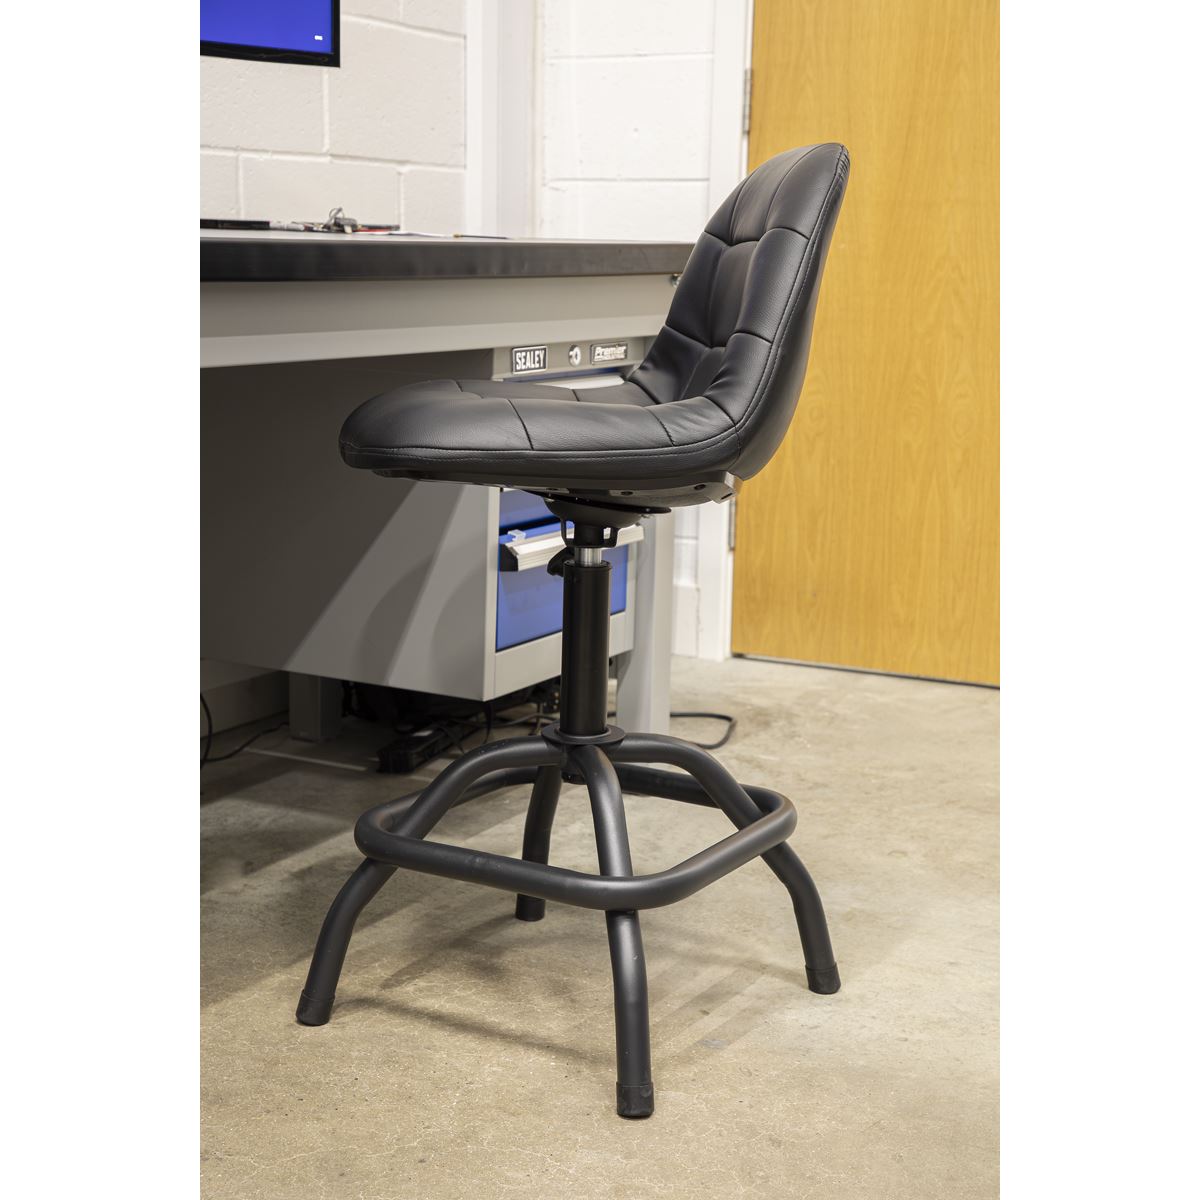 Sealey Premier Industrial Workshop Stool Pneumatic with Adjustable Height Swivel Seat & Back Rest